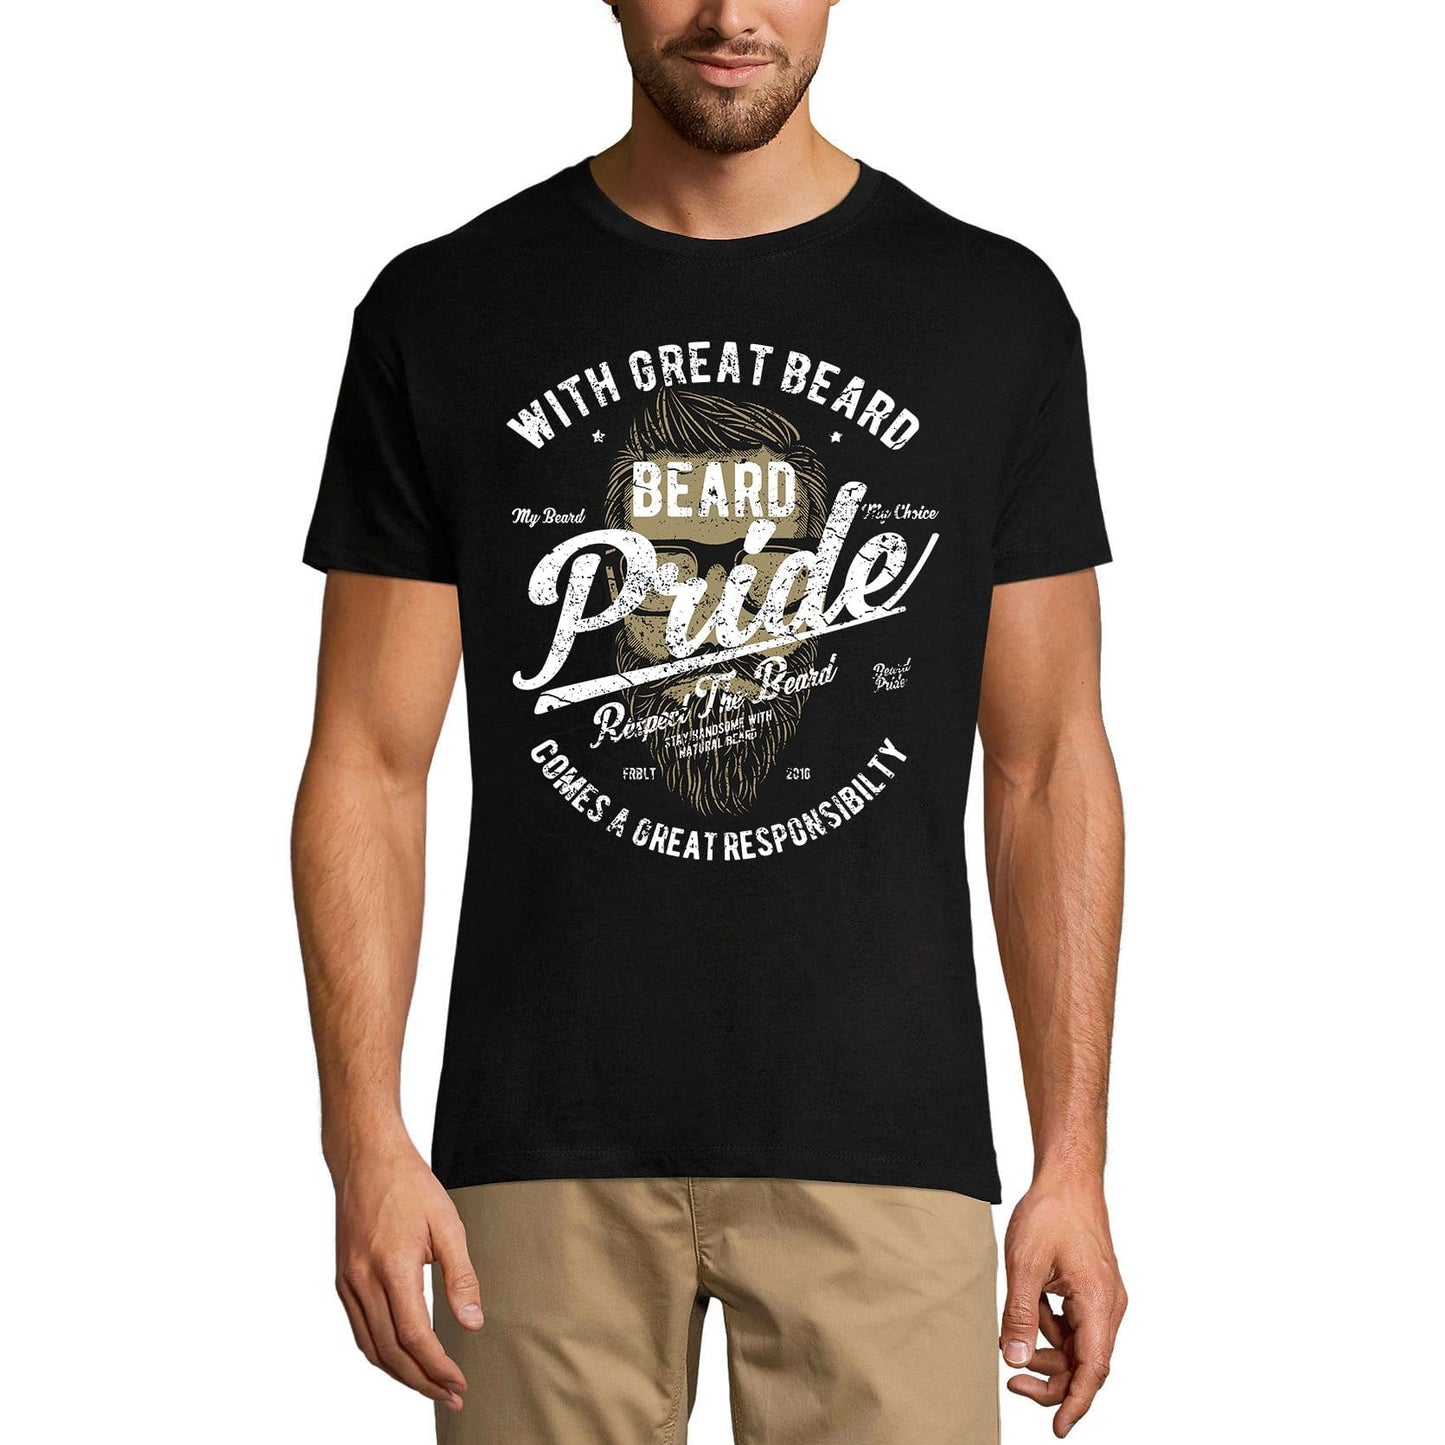 ULTRABASIC Men's T-Shirt With Gread Beard Comes a Great Responsibility - Funny Pride Shirt for Men